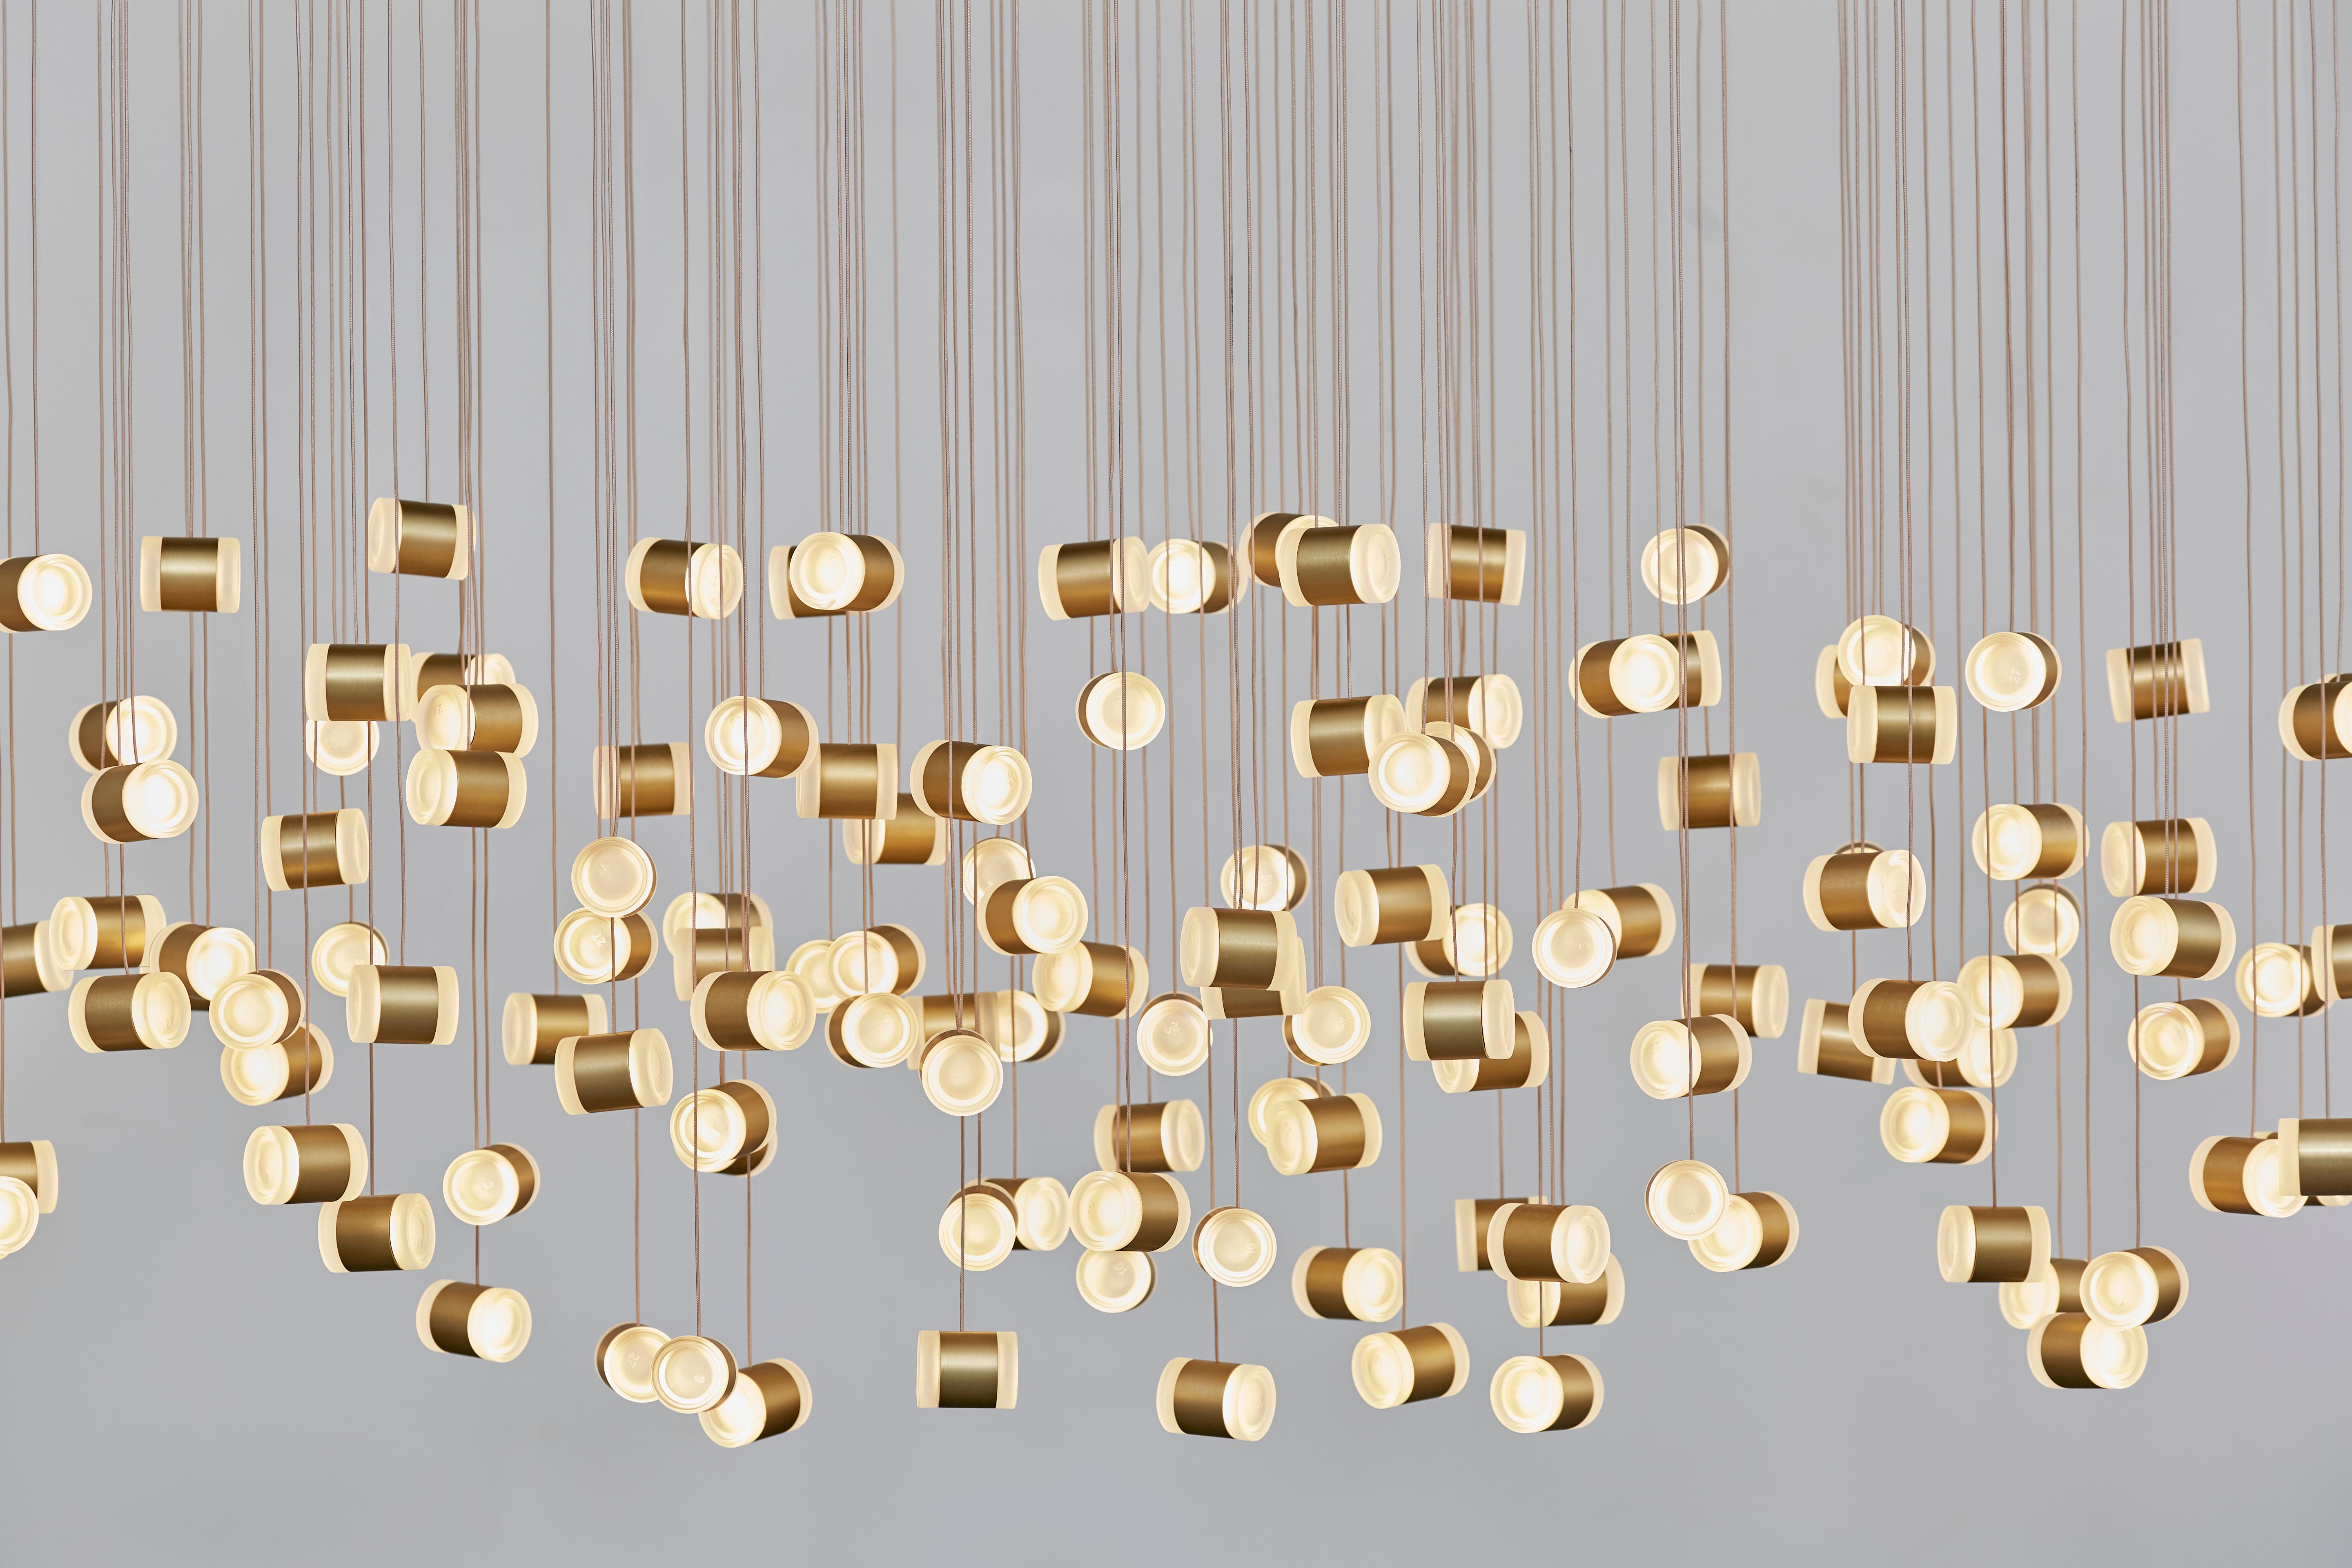 In cooperation with the German cosmetics company Cosnova beauty, this spectacular lighting installation by LLOT LLOV was created from 290 reused face cream containers. Two pots each made of high-quality frosted glass form one lighting element. Due